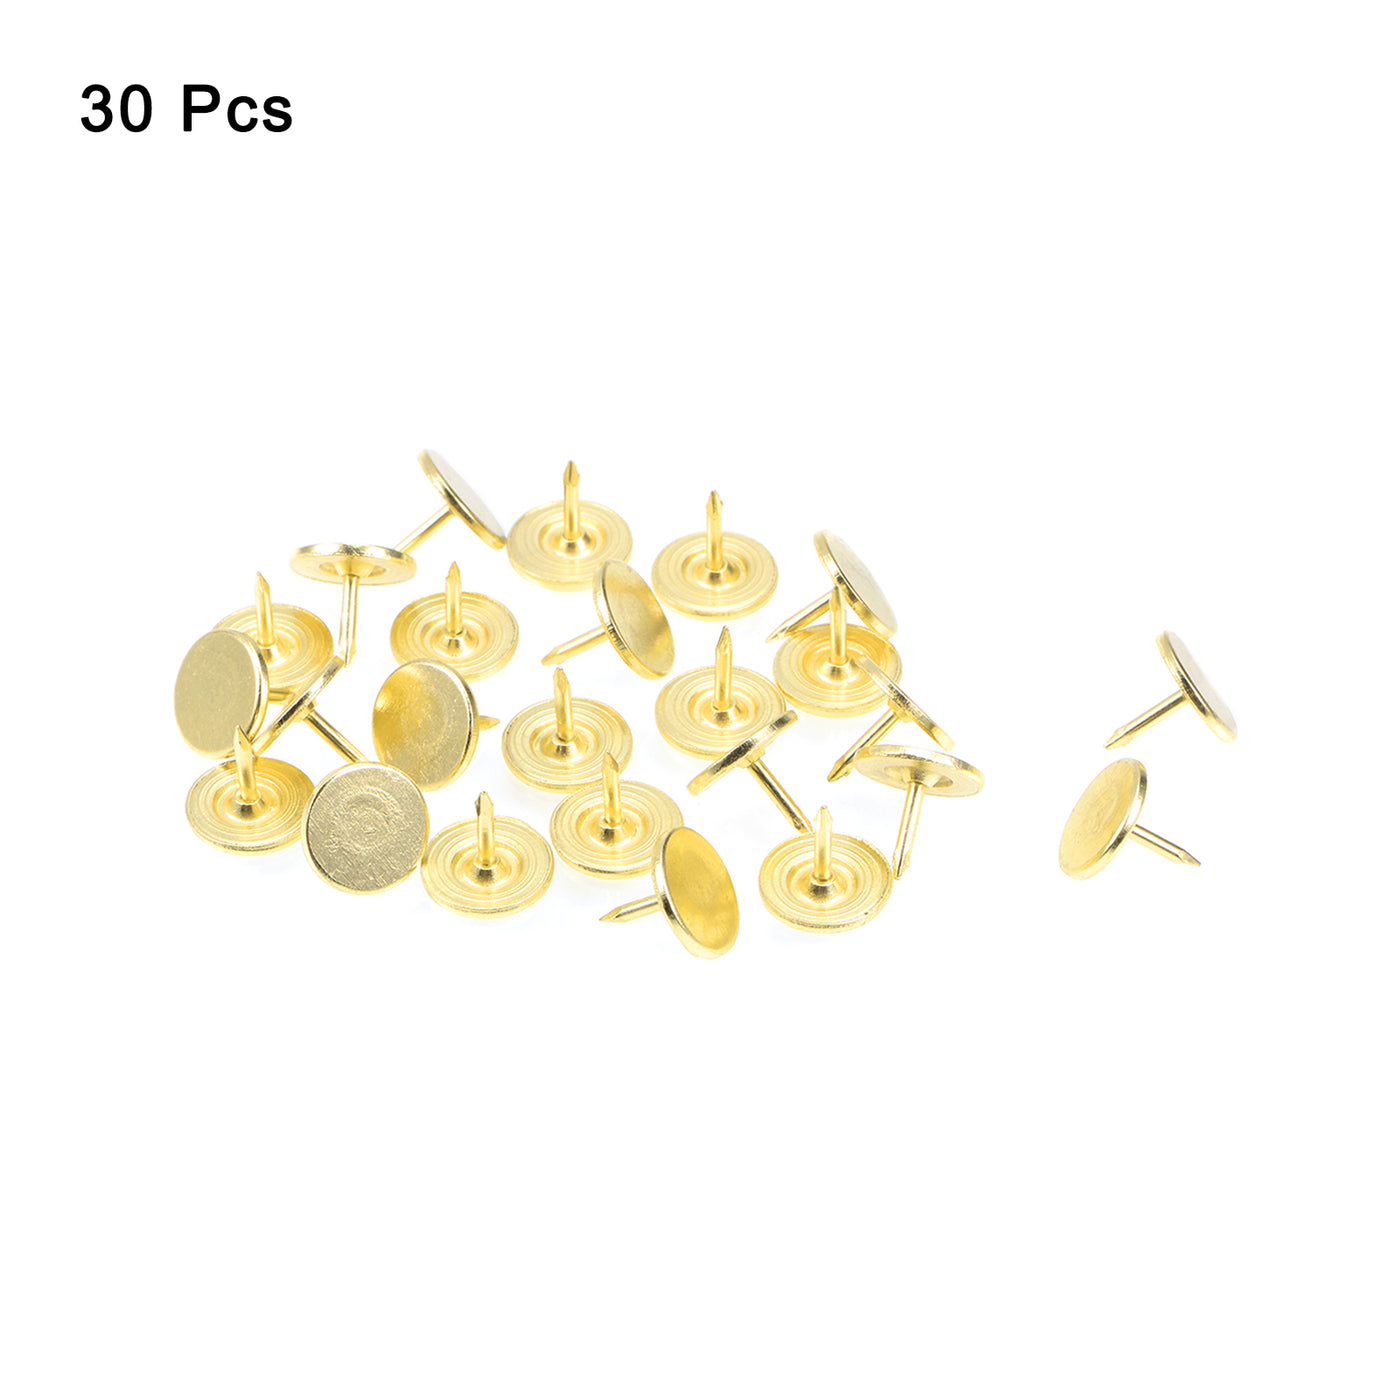 uxcell Uxcell 30Pcs 11mmx10mm Flat Head Decorative Upholstery Tacks Furniture Nails, Gold